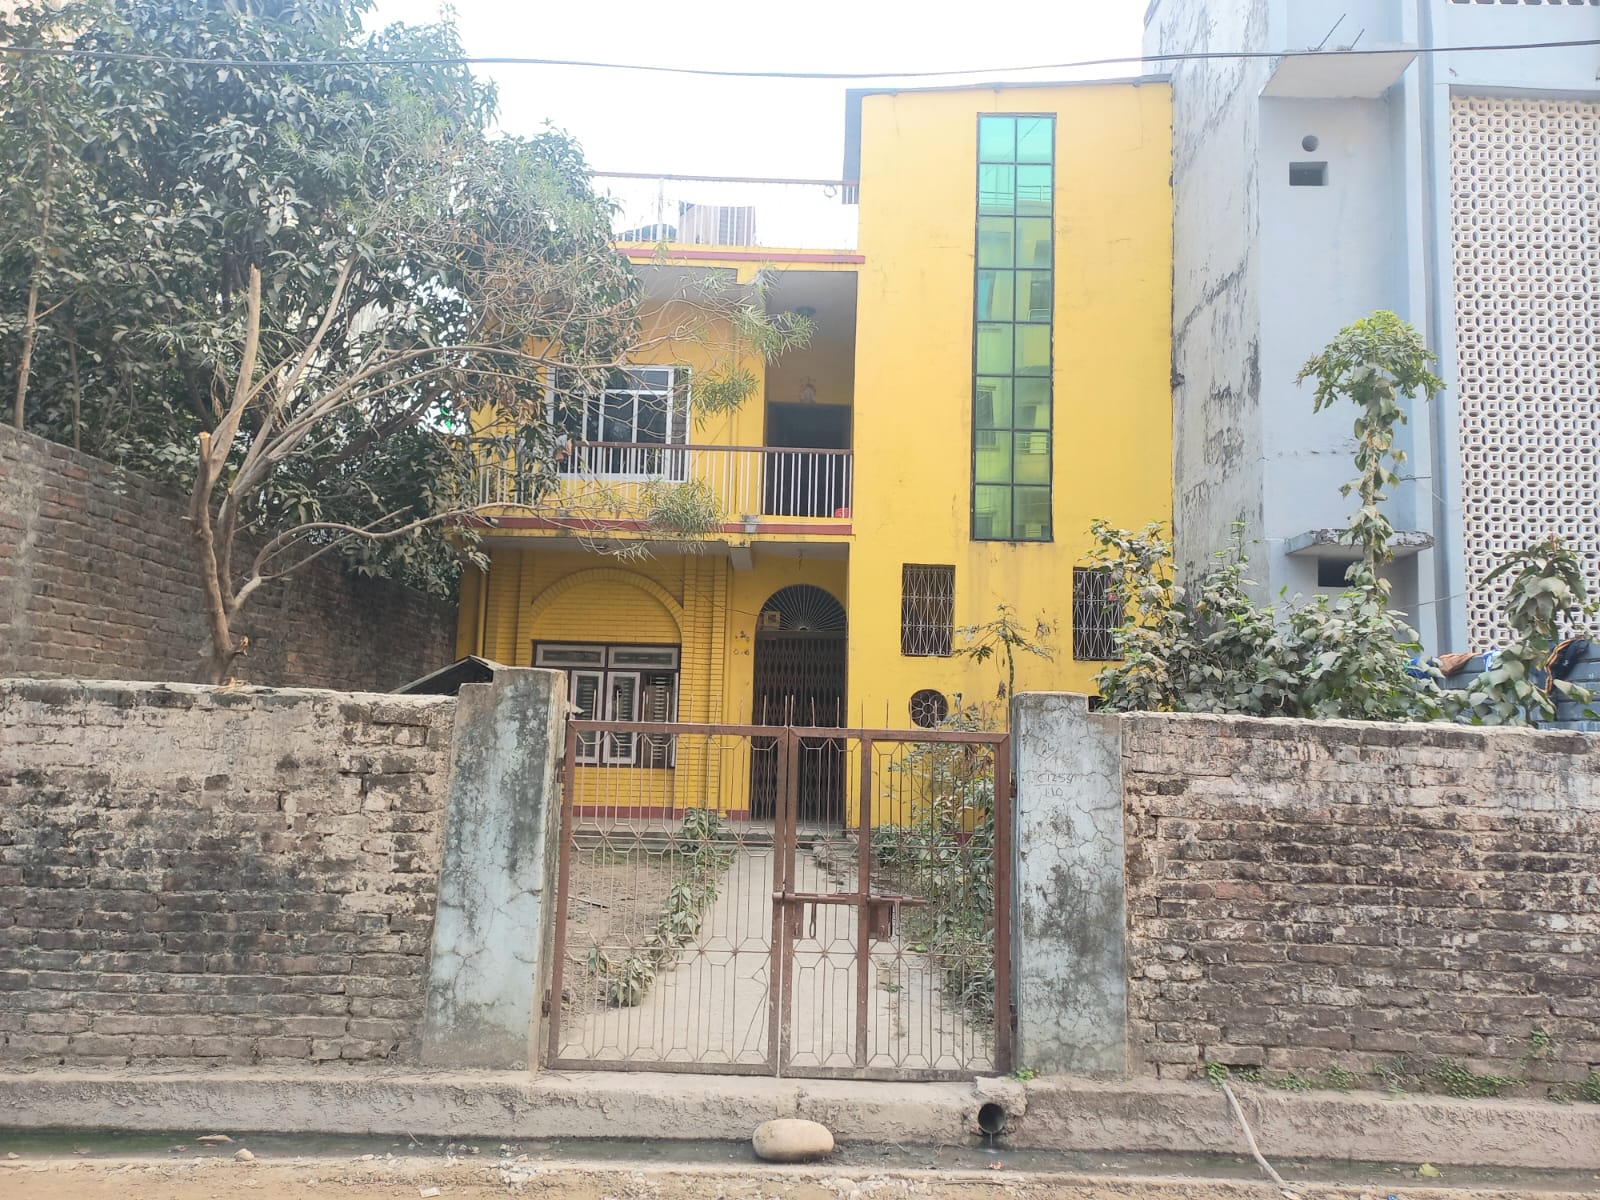 House on Sale at Butwal Traffic Chowk